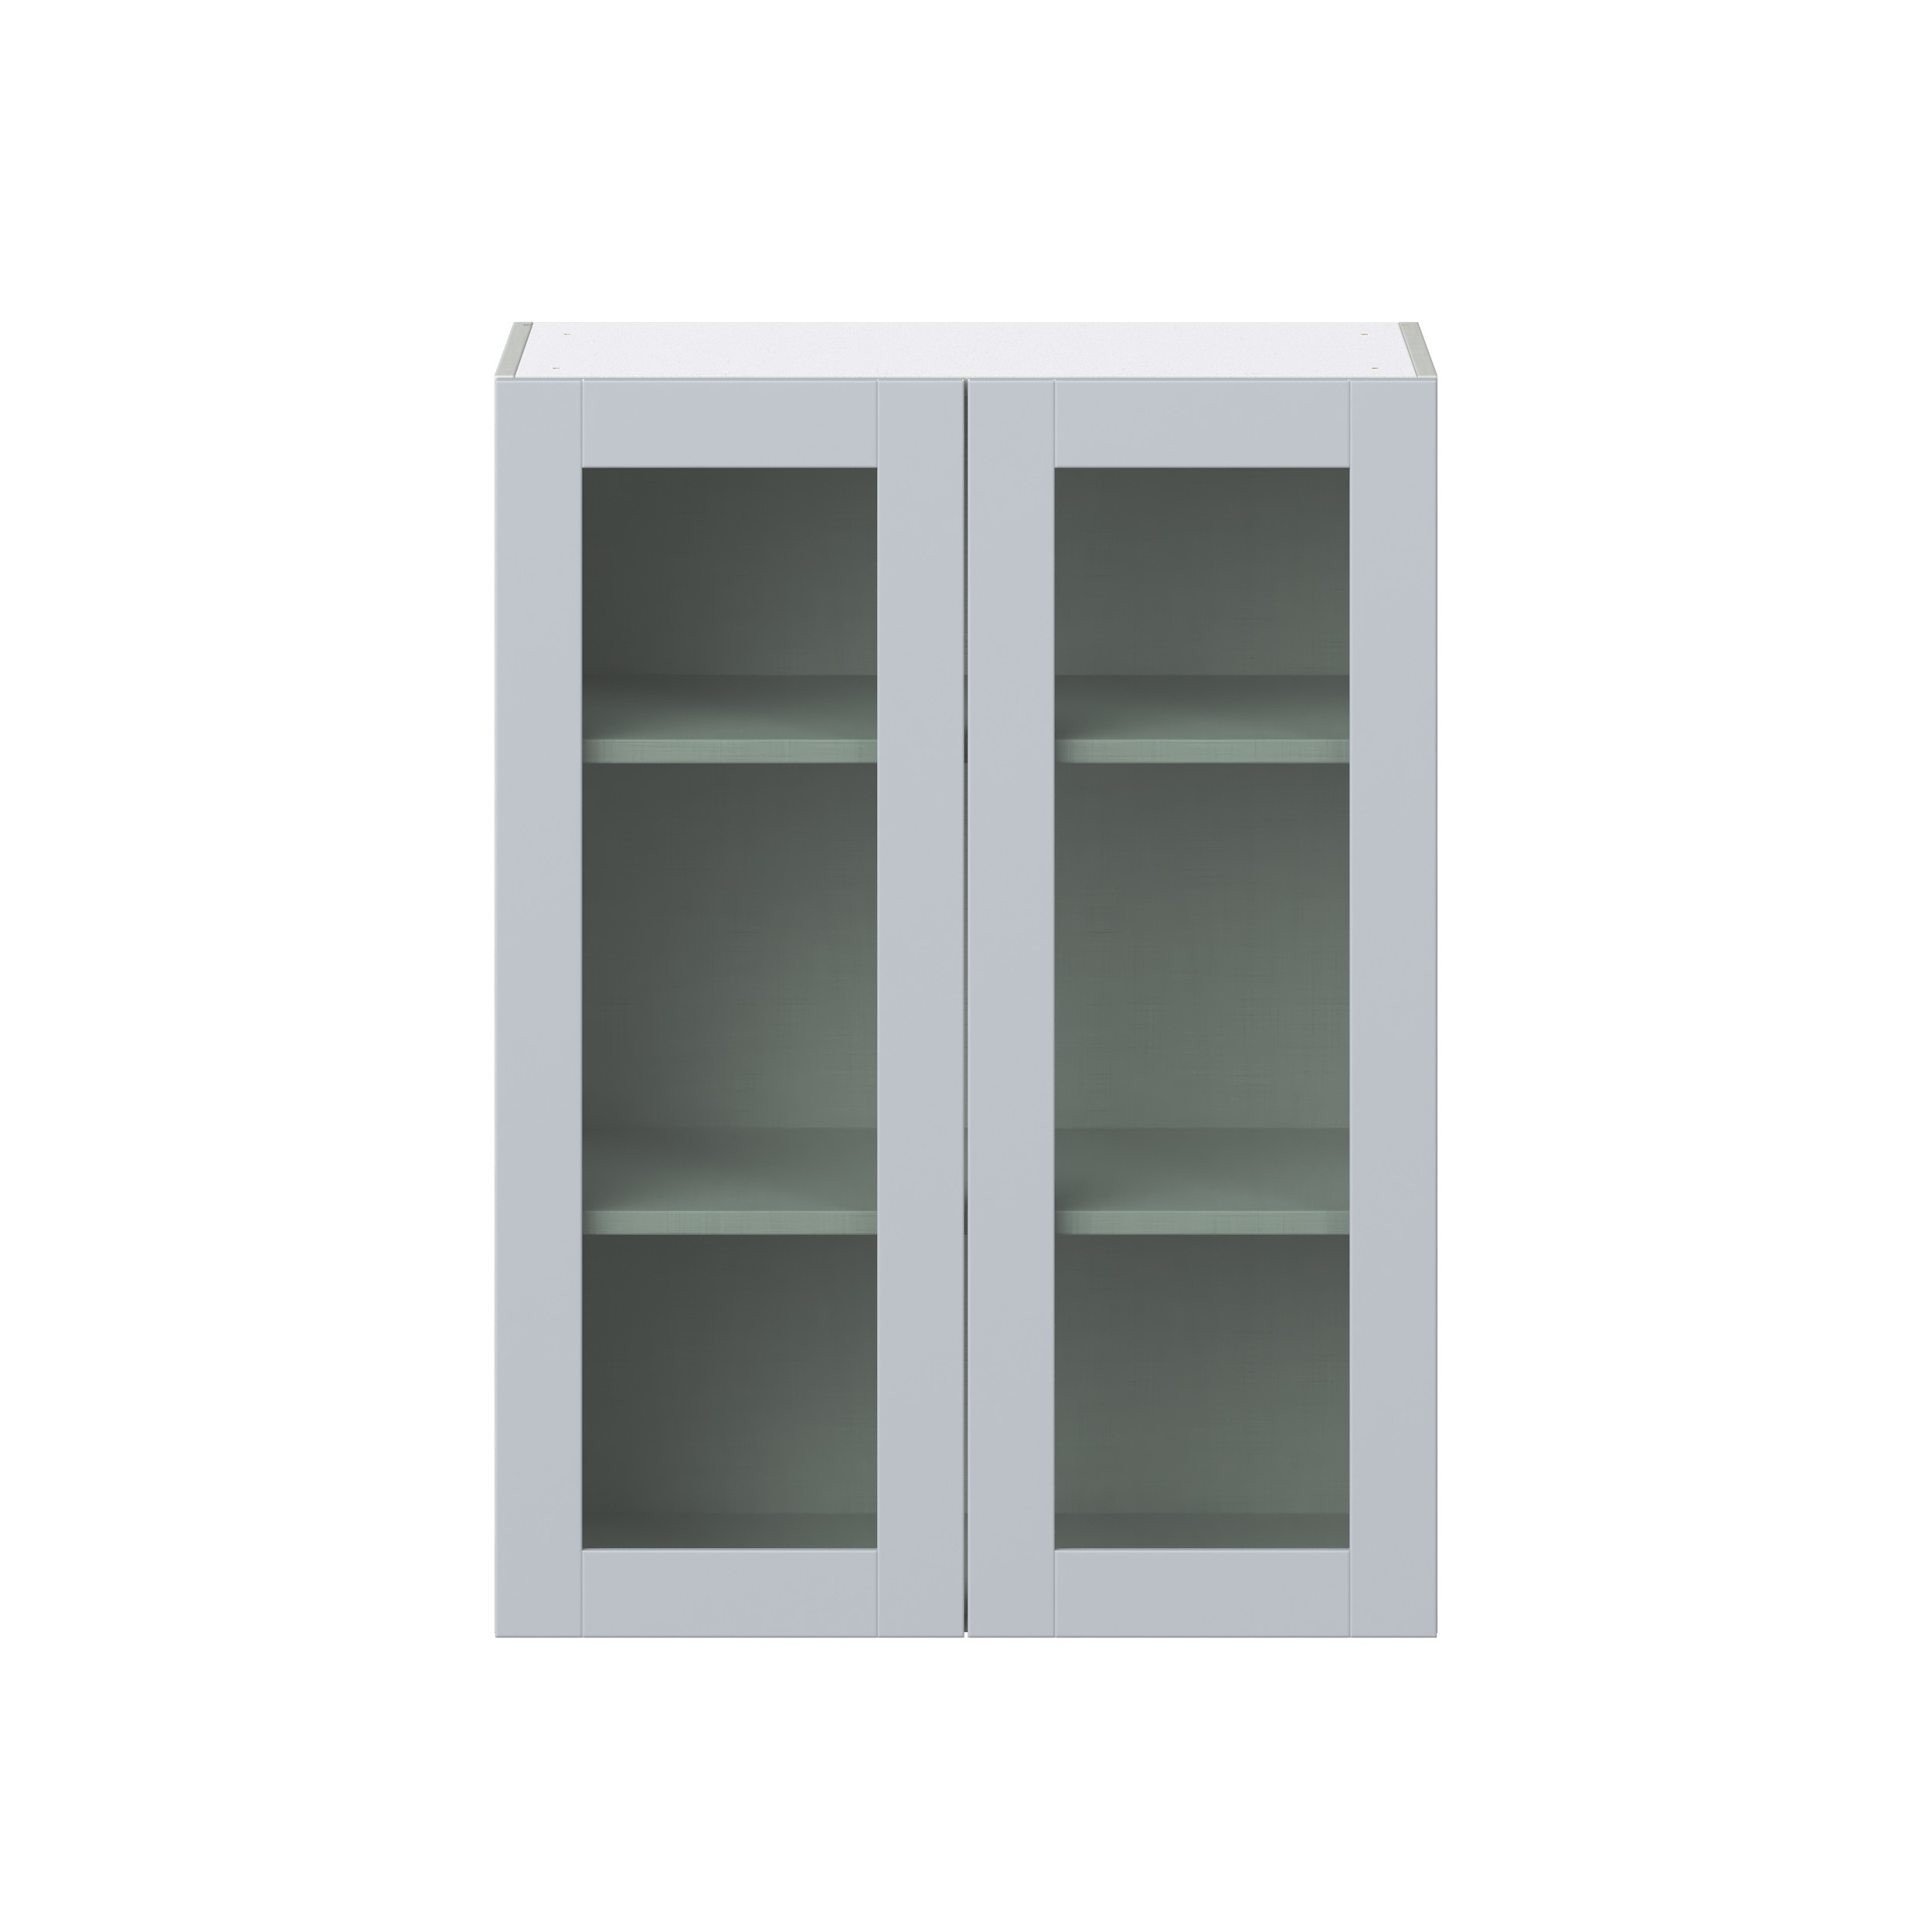 Sea Holly Light Gray Shaker Assembled Wall Cabinet with 2 Glass Door (30 in. W x 40 in. H x 14 in. D)